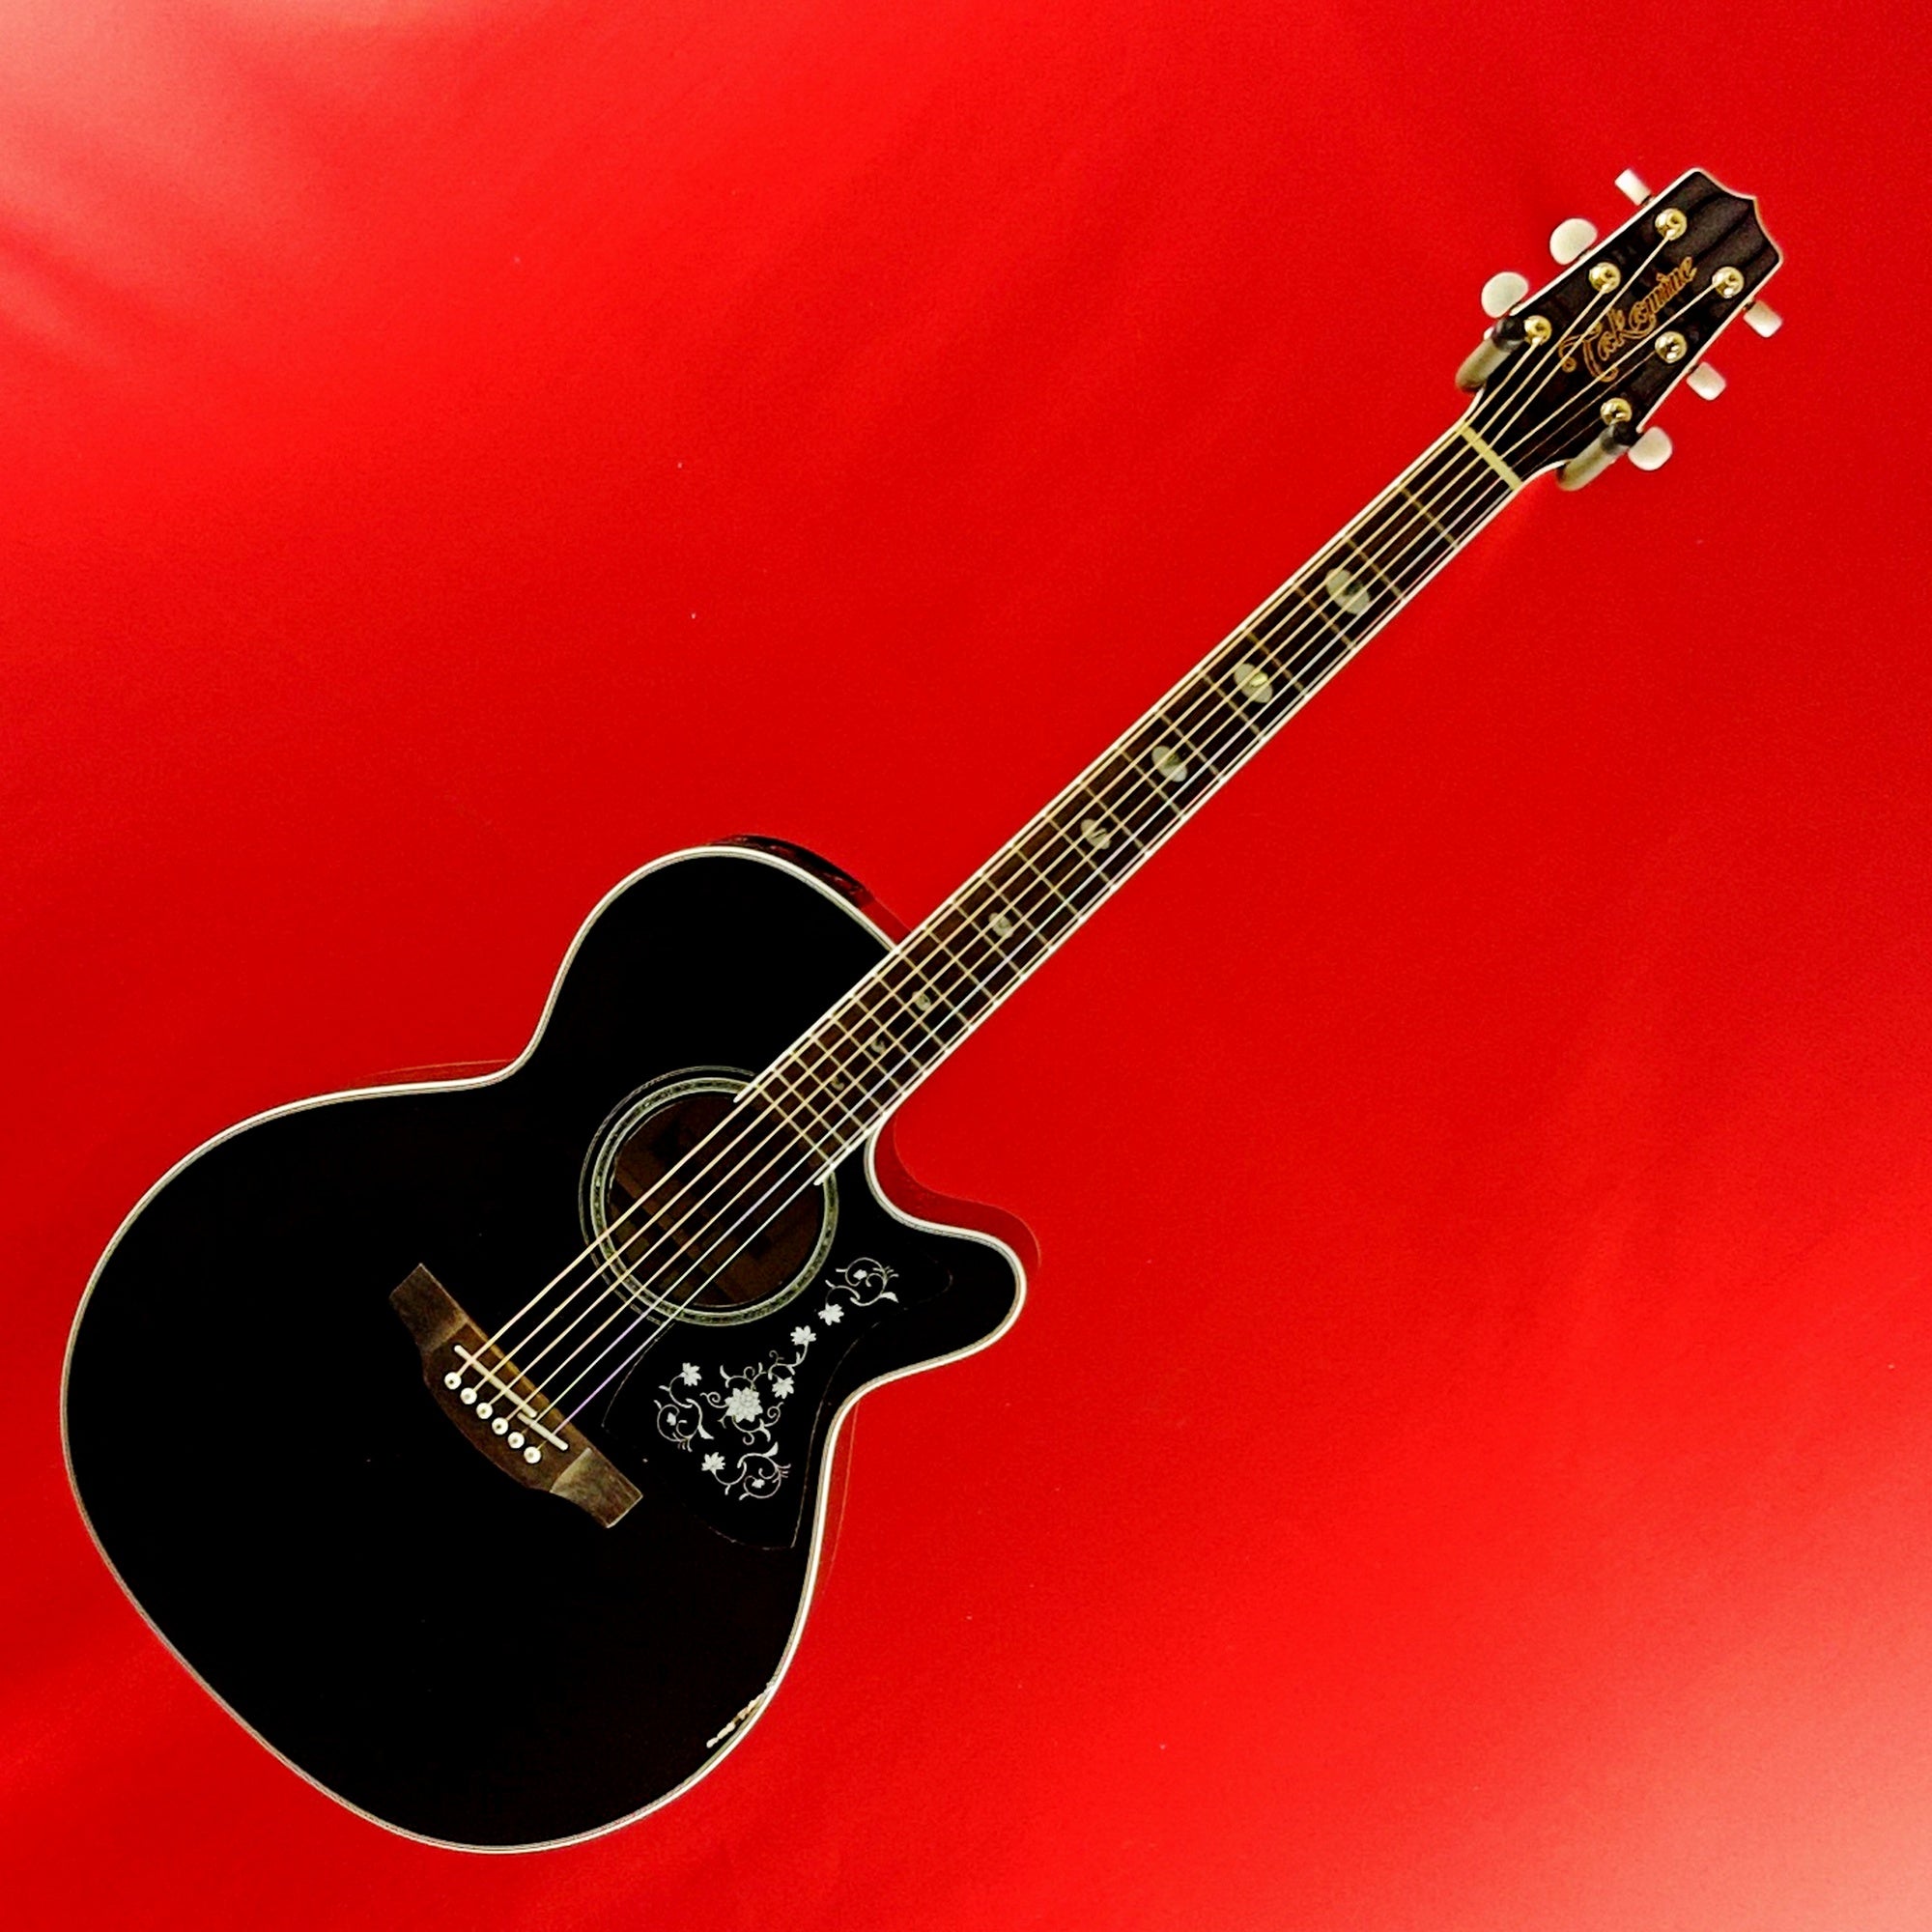 [USED] Takamine GN75CE TBK NEX Cutaway Acoustic-Electric Guitar, Transparent Black (See Description)